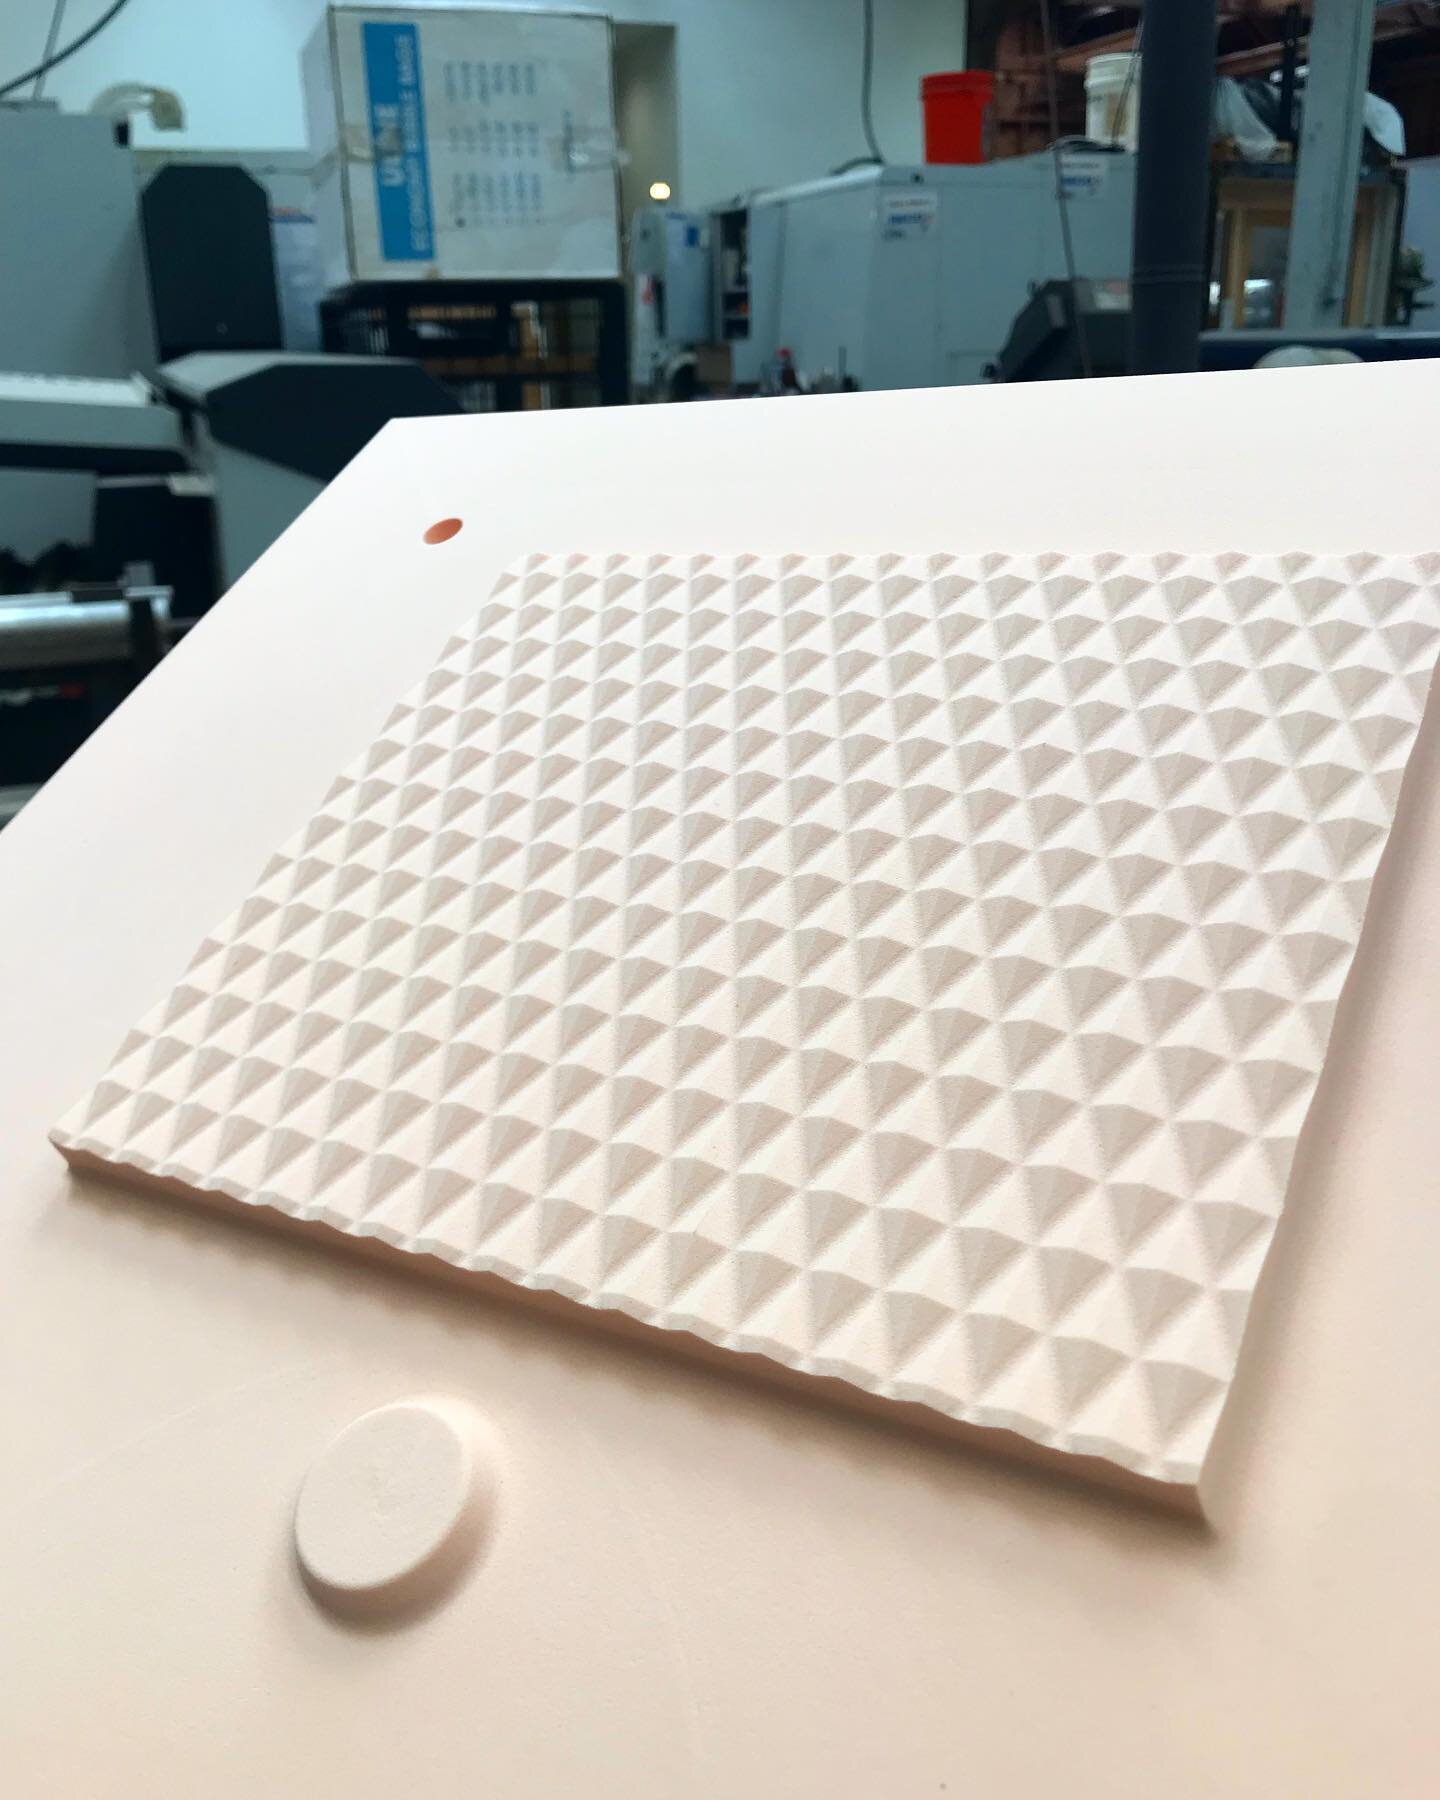 Our CNC router is looking forward to the weekend! Between Urethane Binders for cope and drag molding and amplifier chassis we have been running it nonstop. Here&rsquo;s a part we made for OK Foundry out of high density foam. #smallbusiness #foundry #